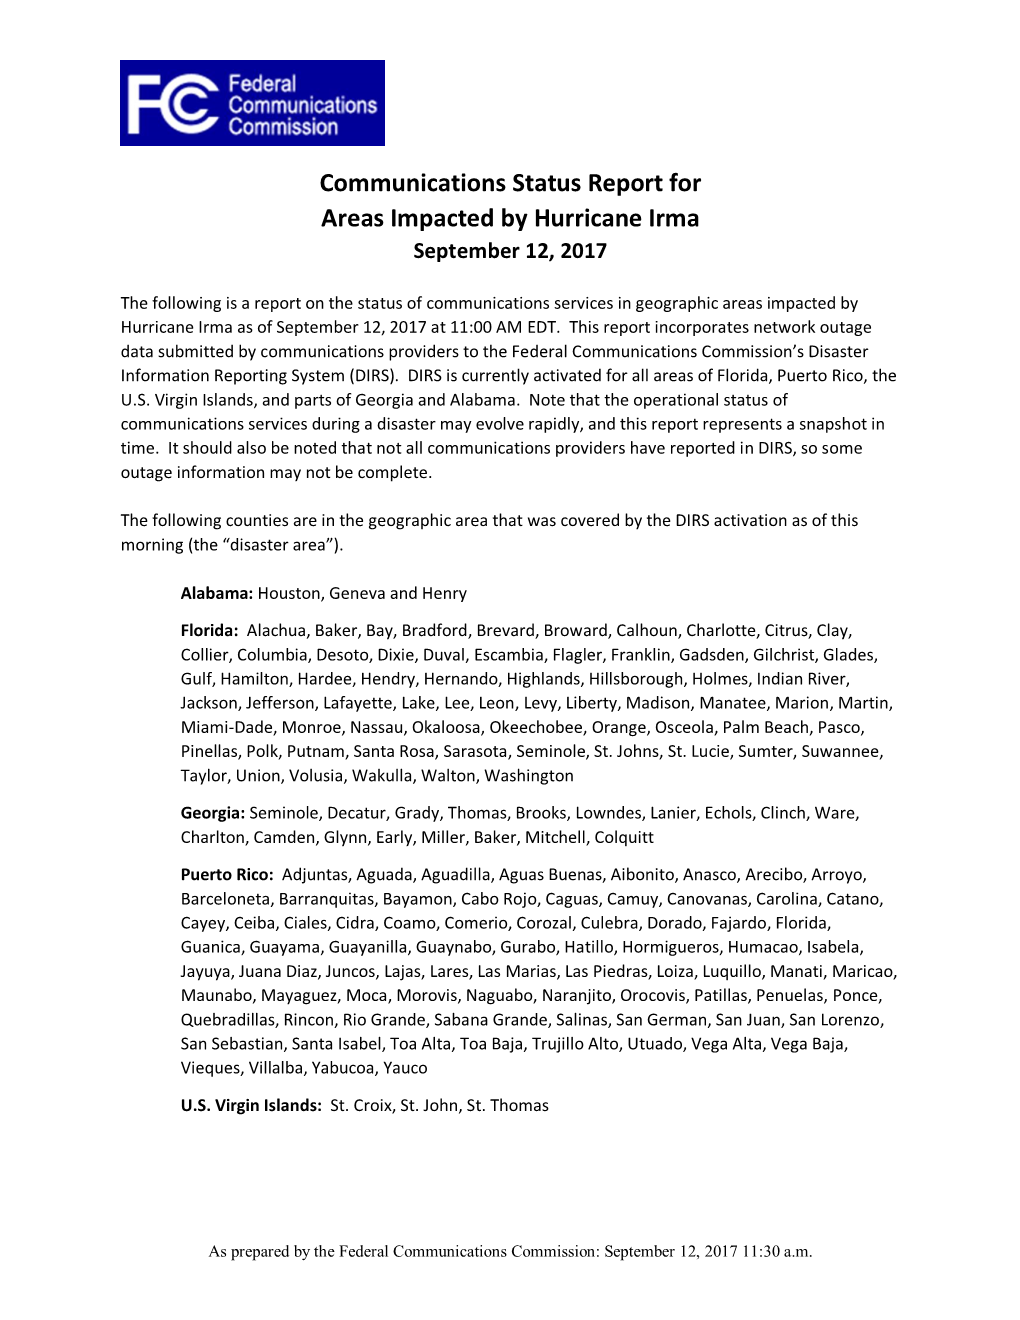 Communications Status Report for Areas Impacted by Hurricane Irma September 12, 2017